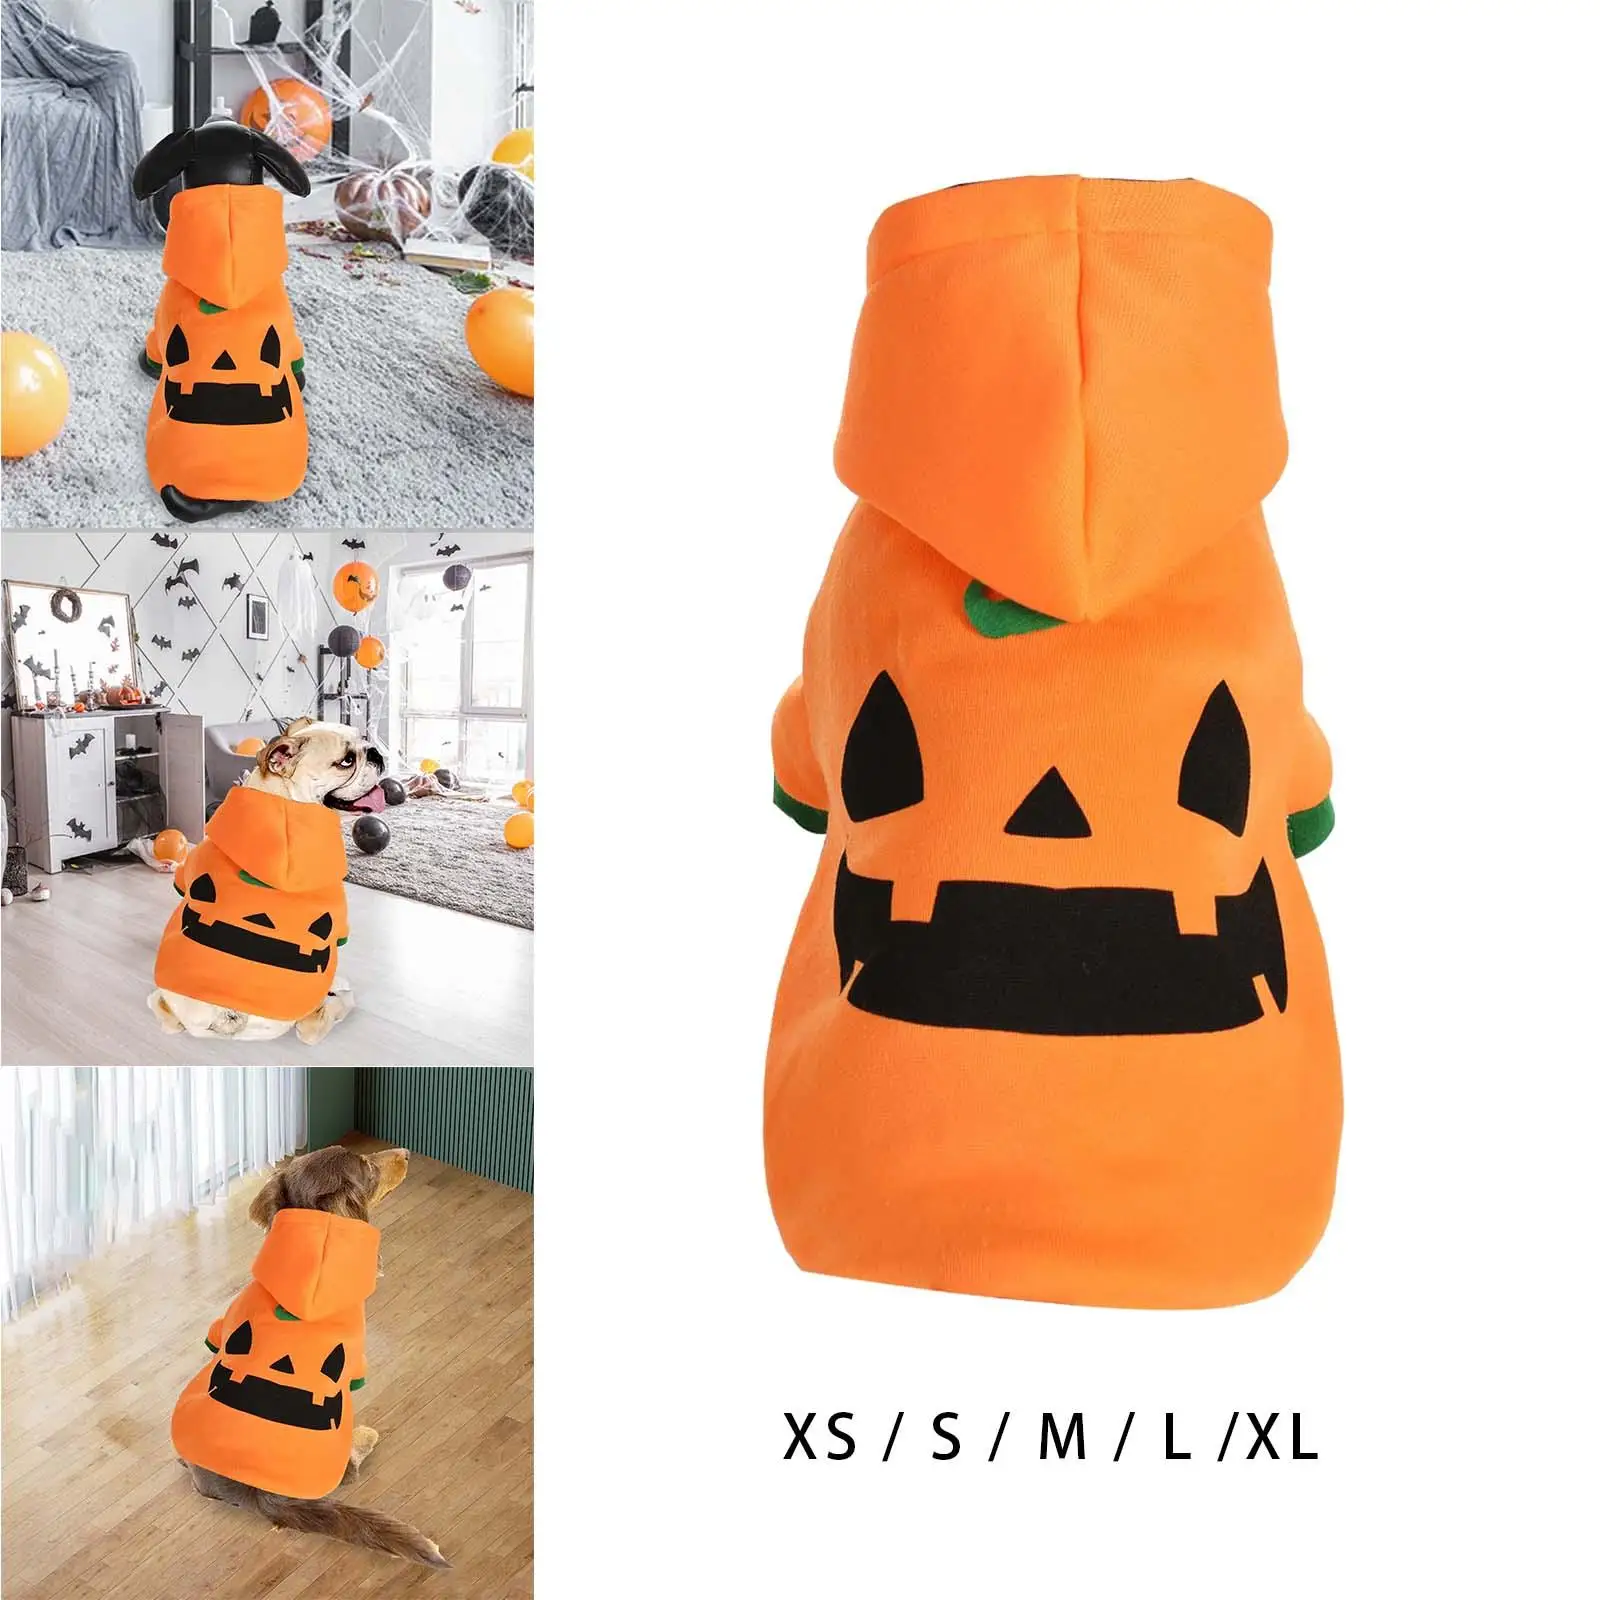 Dog Cat Halloween Pumpkin Costume Funny Cosplay Dress up Accessories Winter Coat Pet Costume for Party Puppy Cosplay Decoration